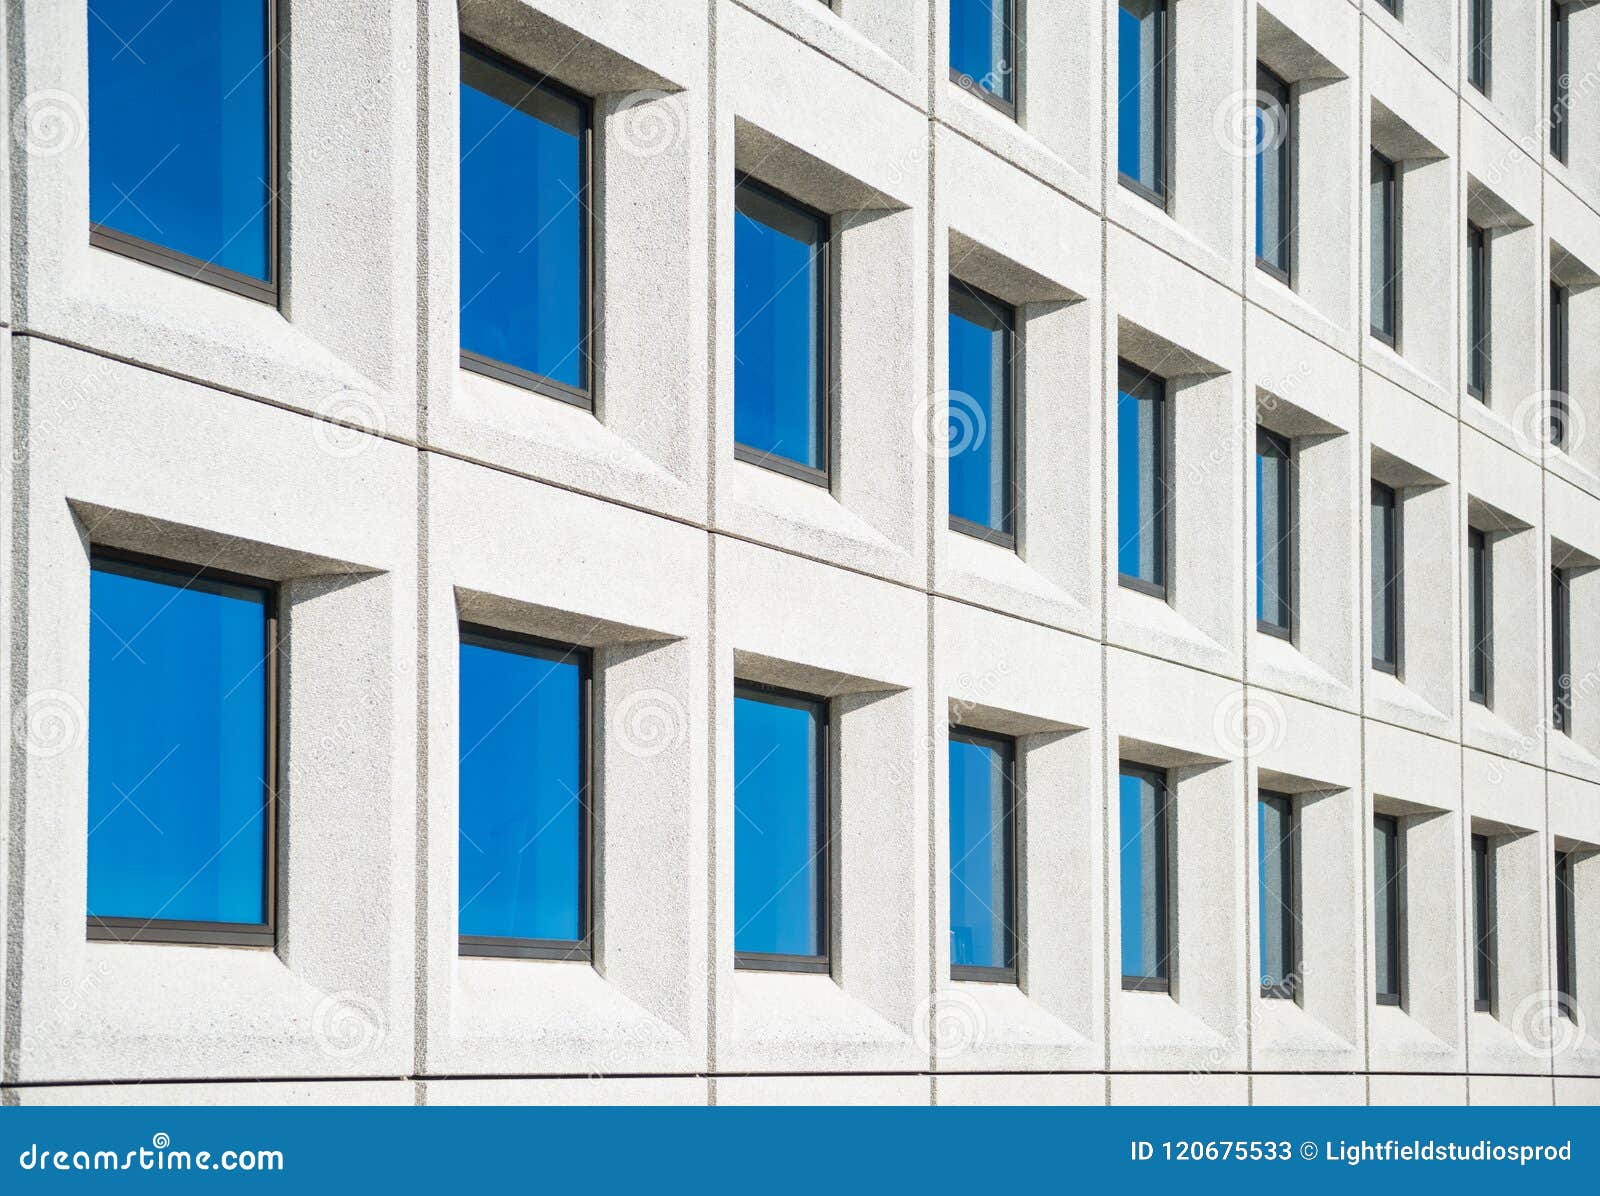 Full Frame View of Modern White House with Blue Windows Stock Image ...